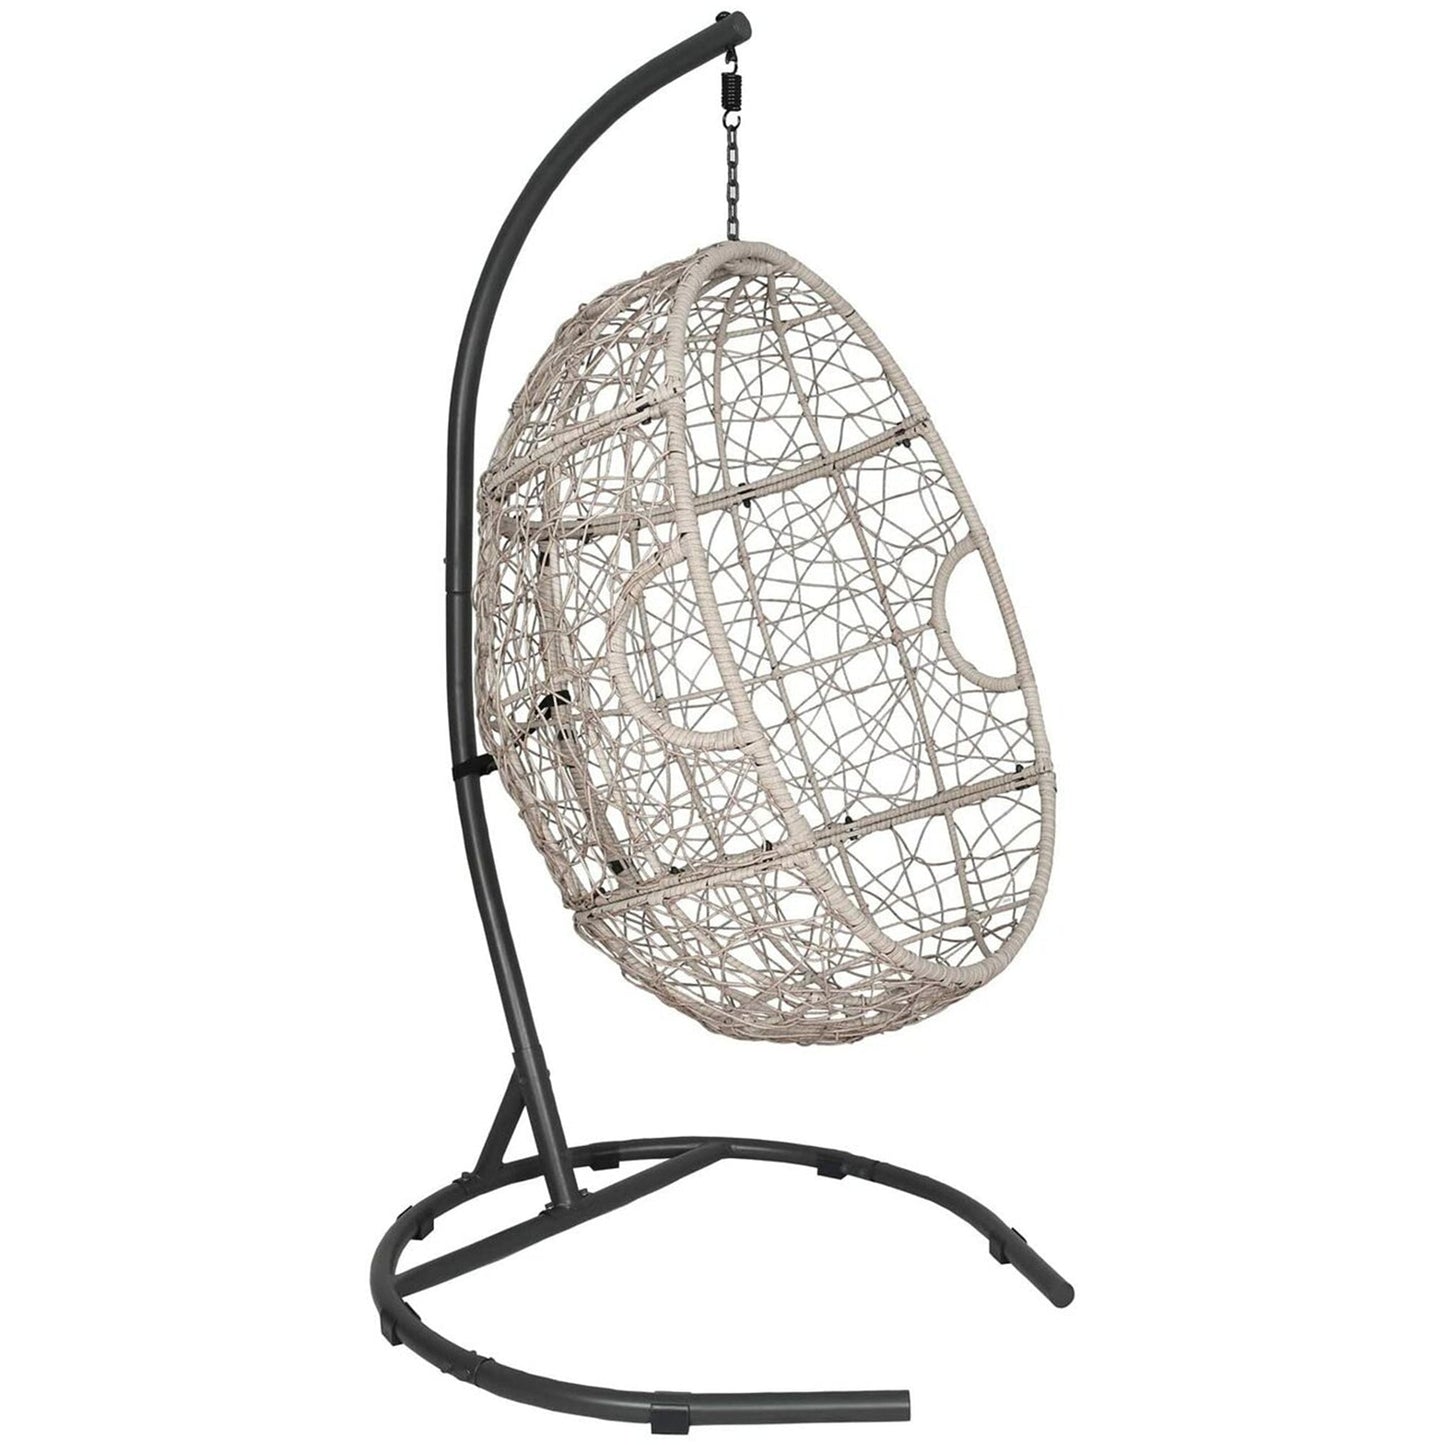 Outdoor Patio Wicker Hanging Basket Swing Chair Drop Egg Chair with Cushion and Stand (Navy)